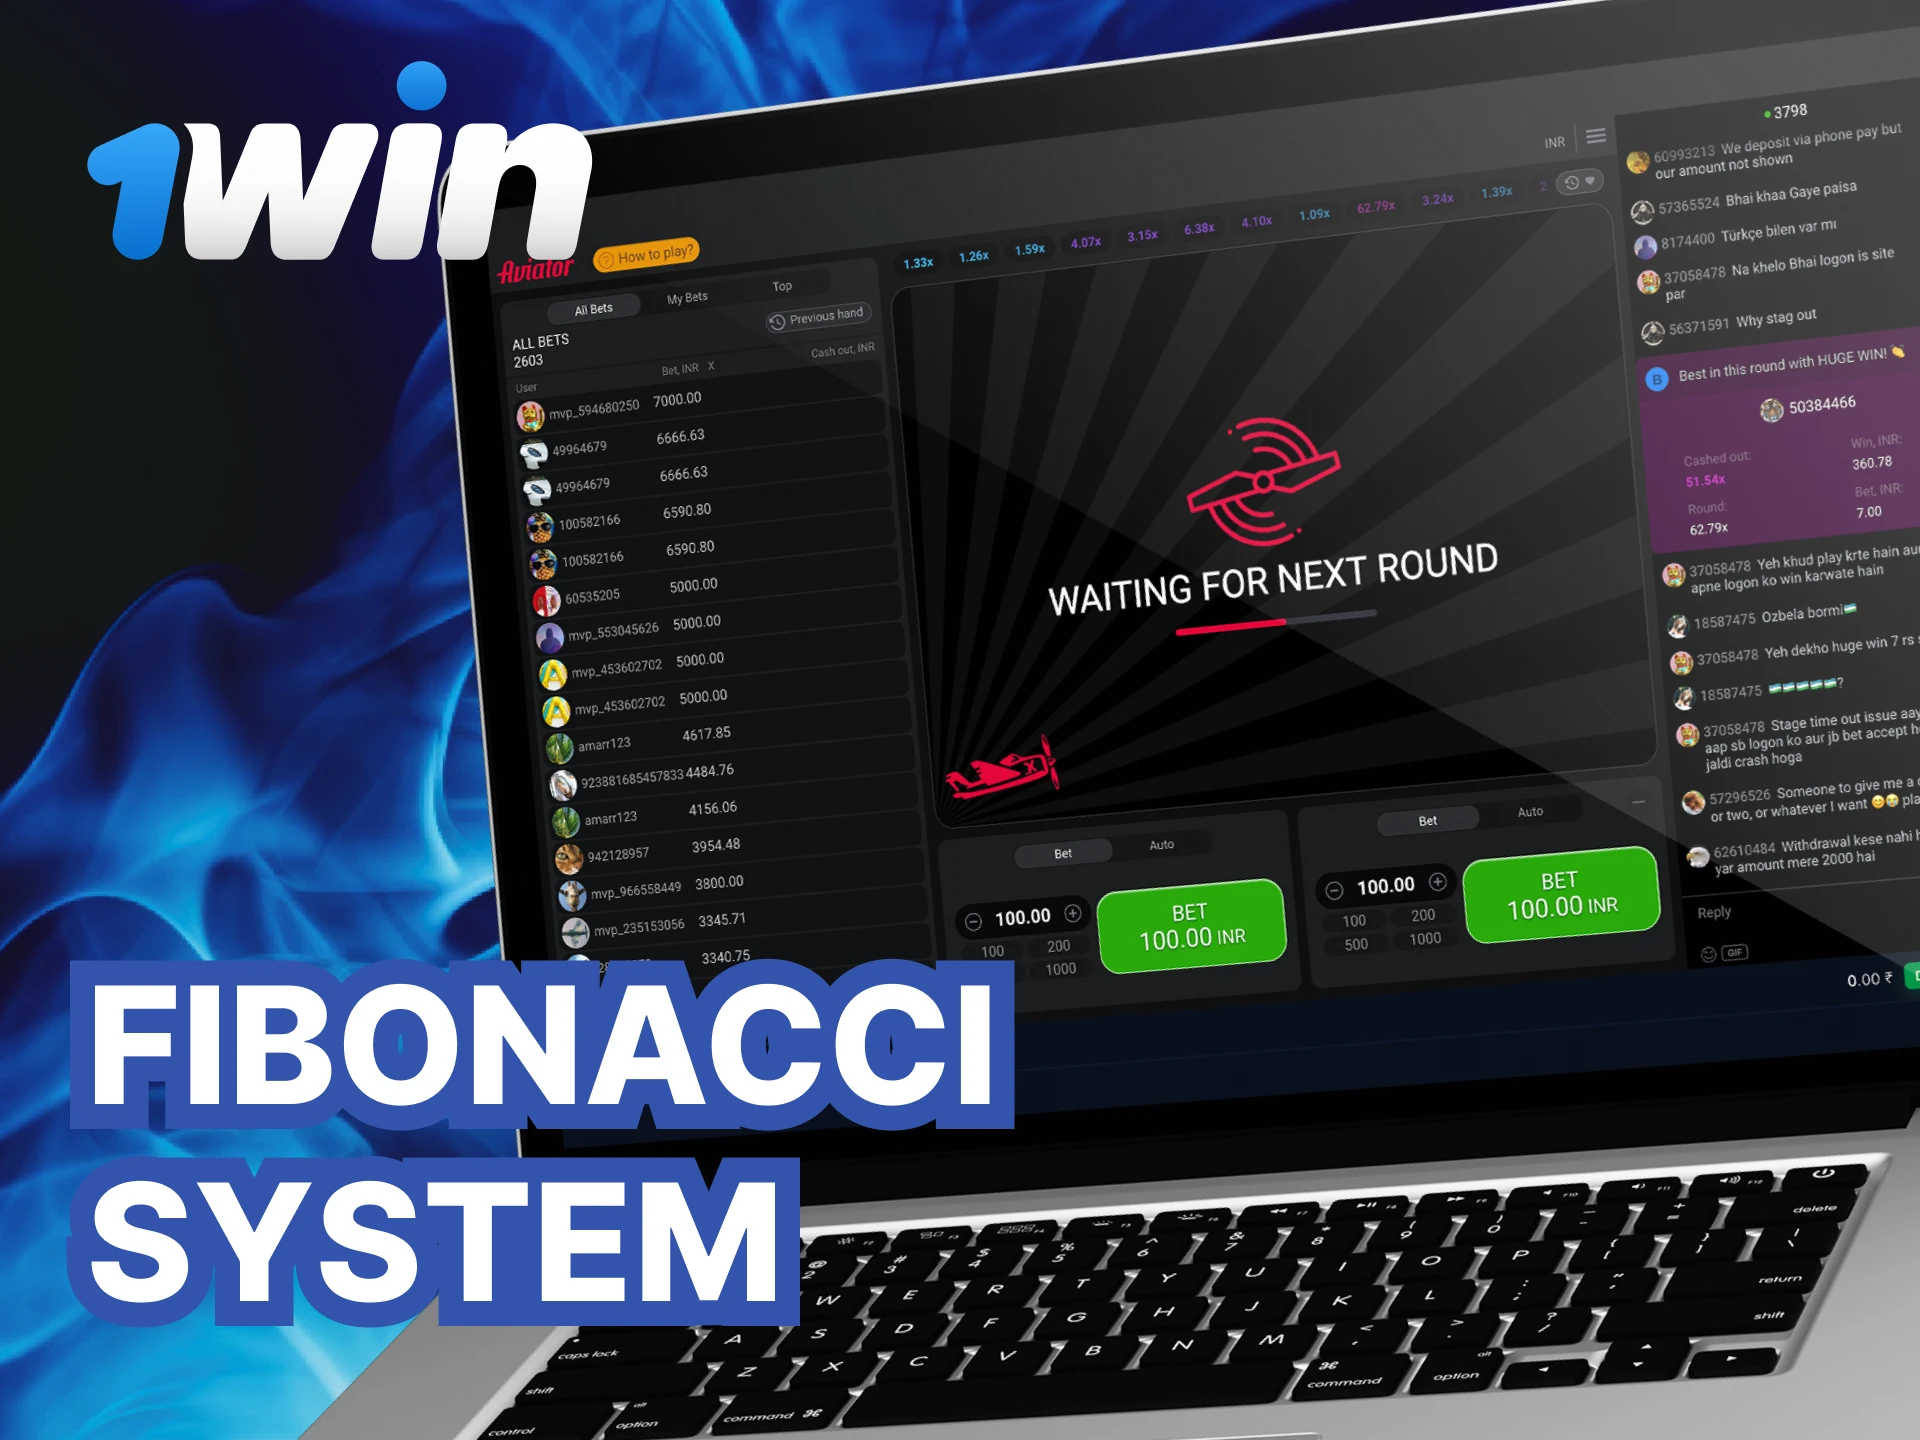 What is the Fibonacci System for playing in the Aviator game at 1Win casino.